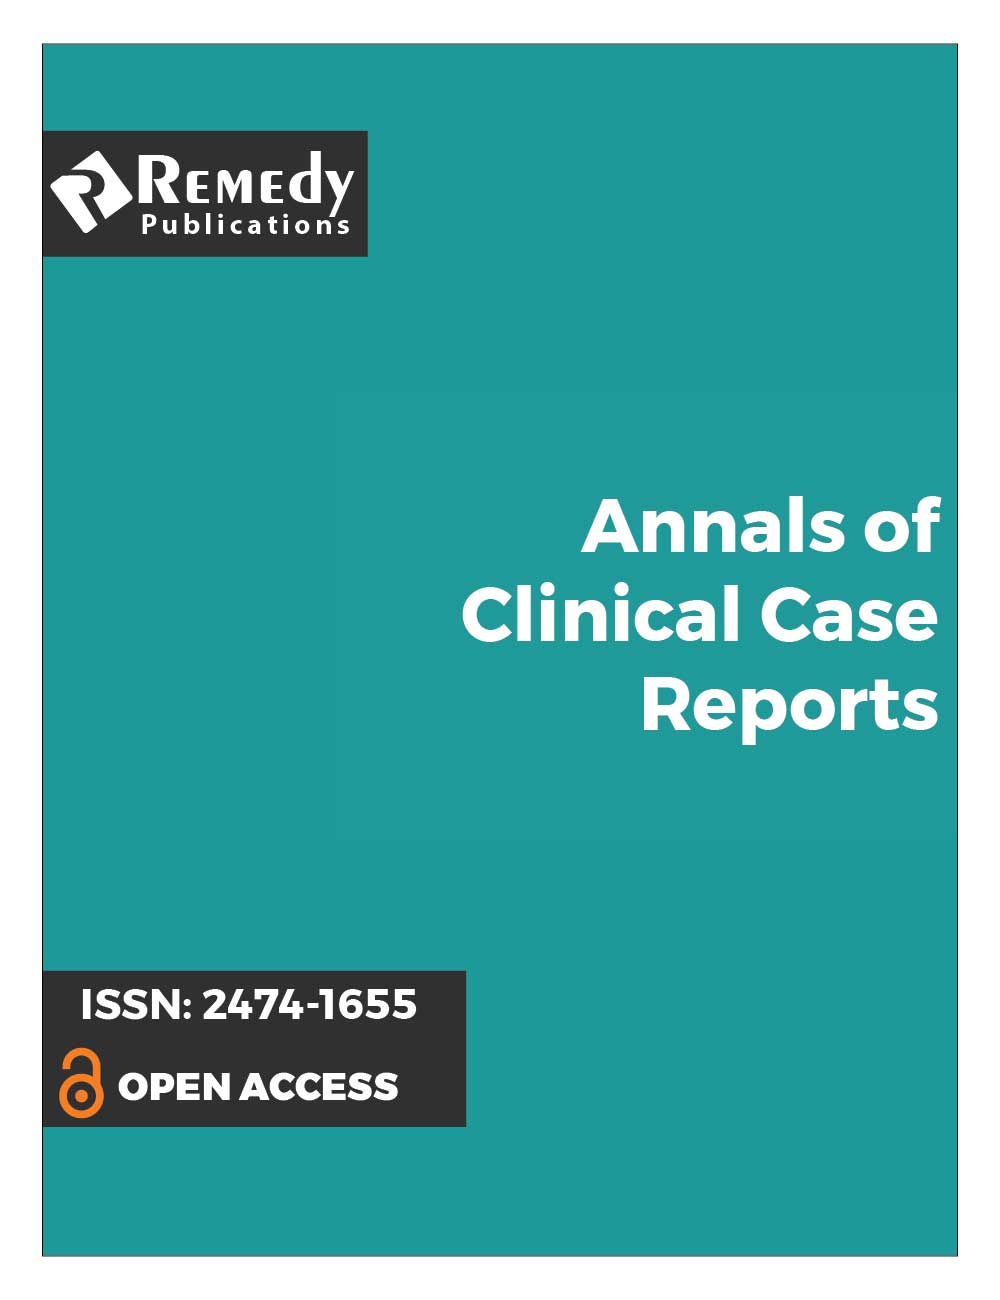 Annals of Clinical Case Reports